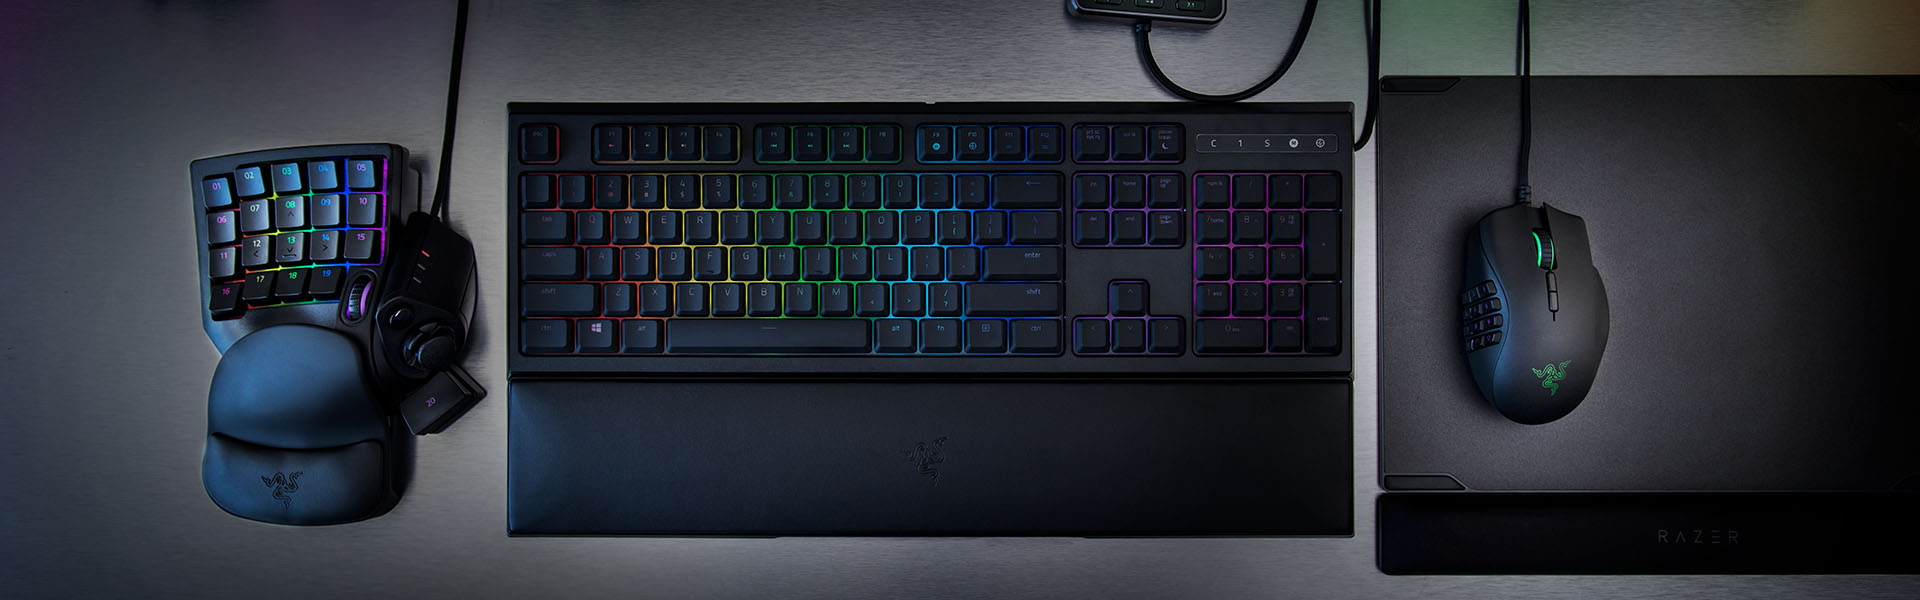 Razer Introduces More Ways to Customize with New Mouse & Keypad 19